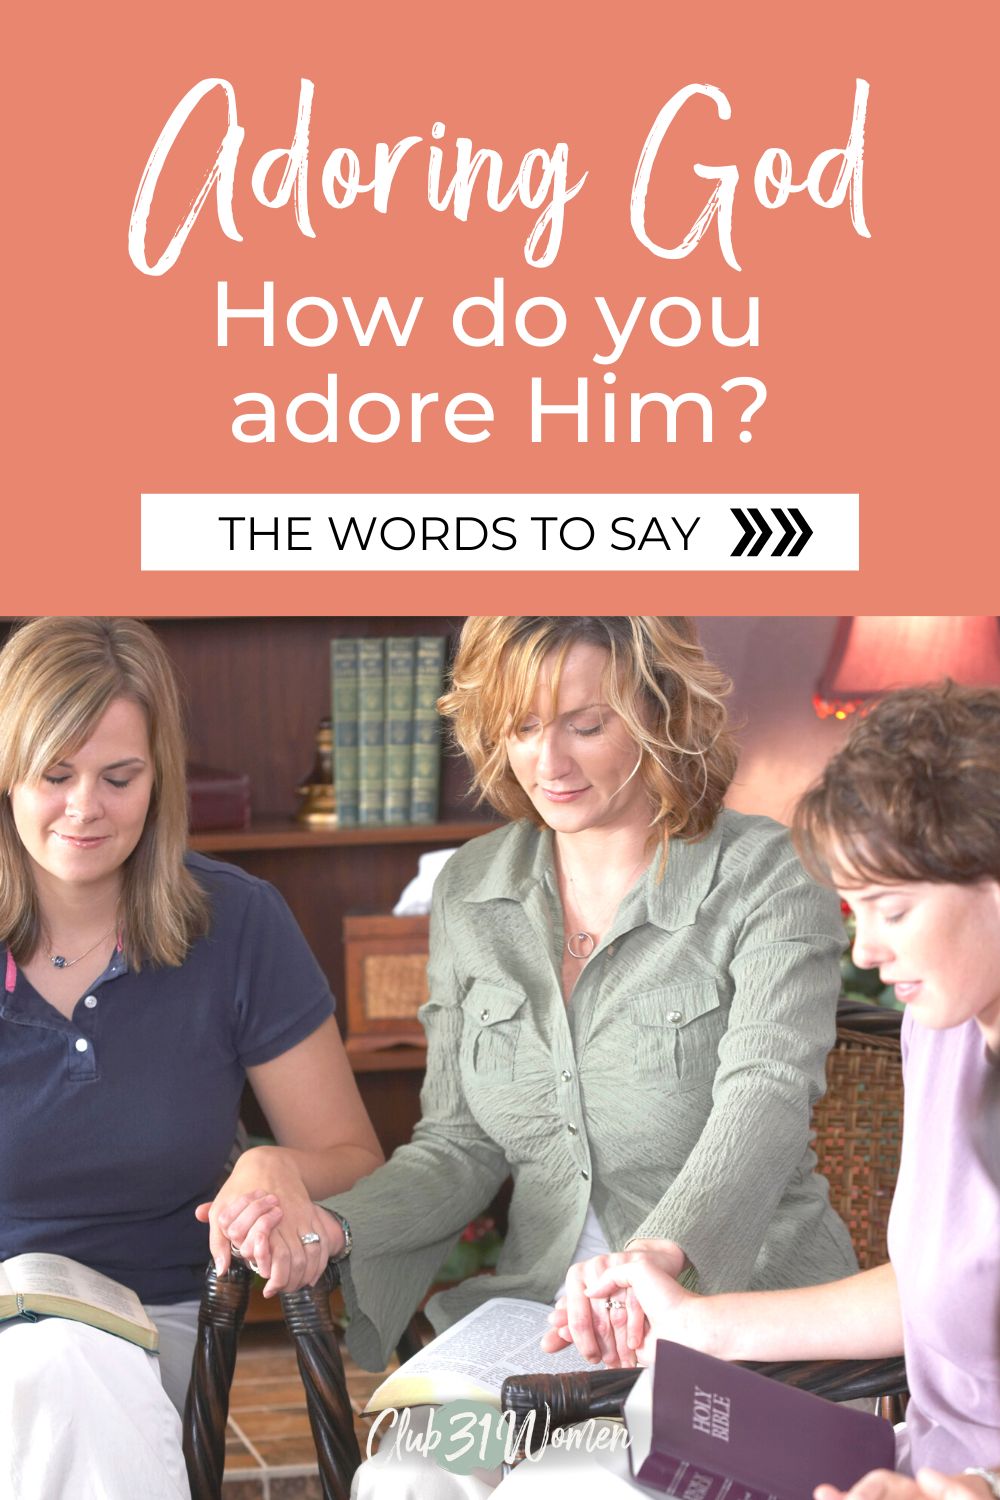 How You Can Adore God While In A Group of Women via @Club31Women